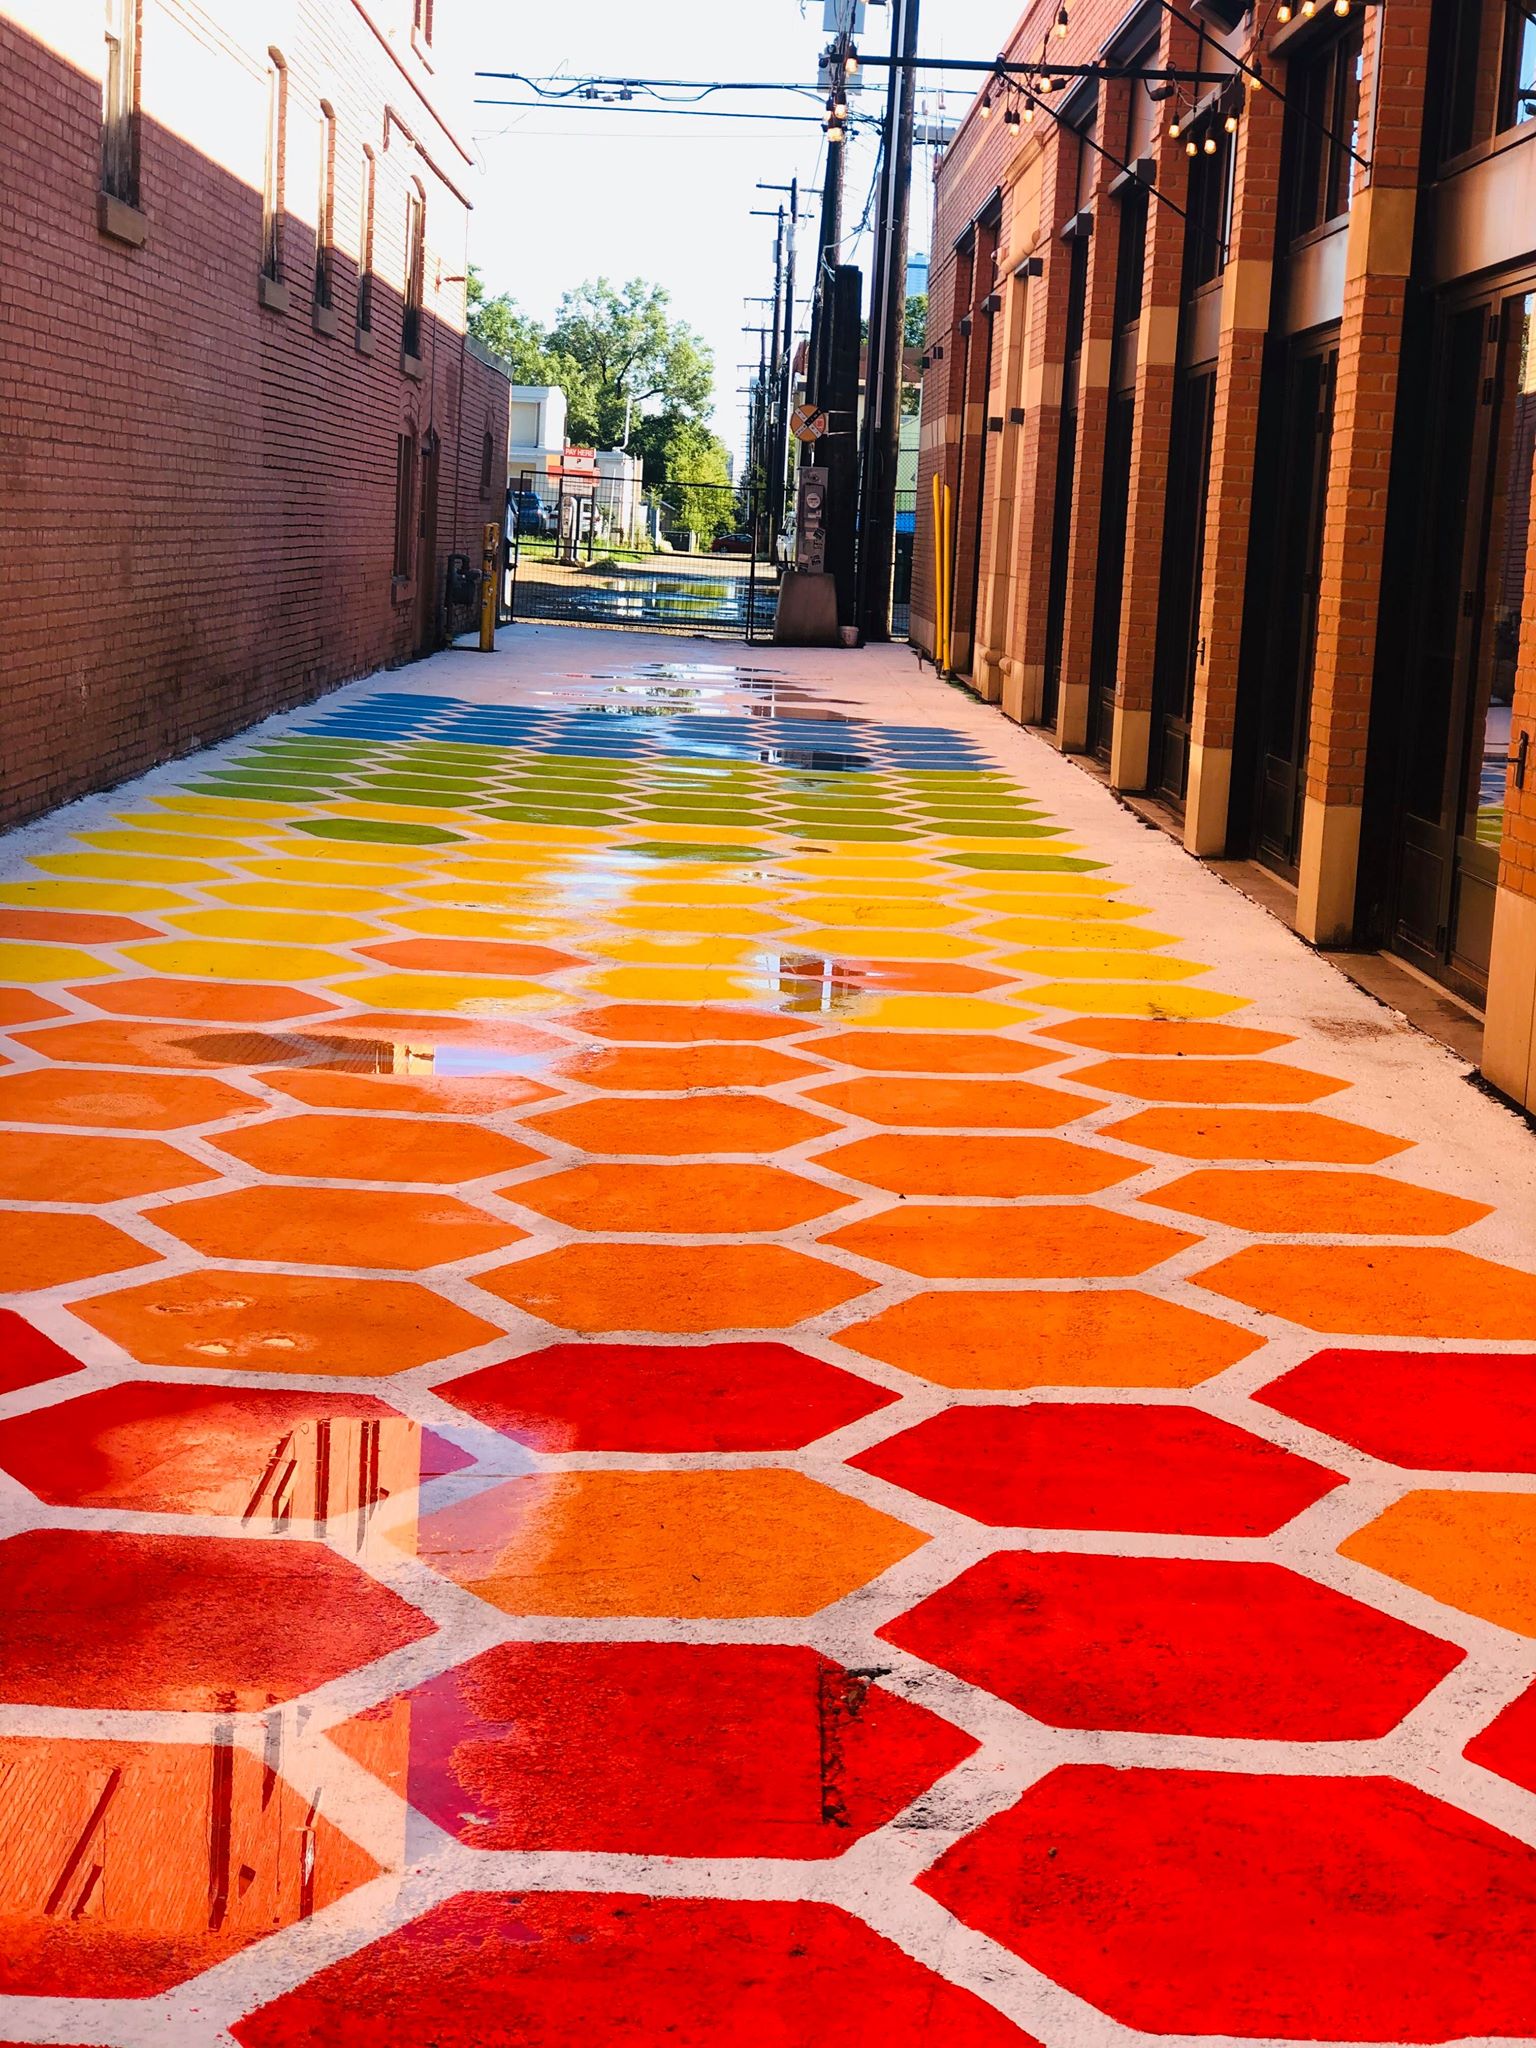 Hexagons in colours of the rainbow stretch down an alley